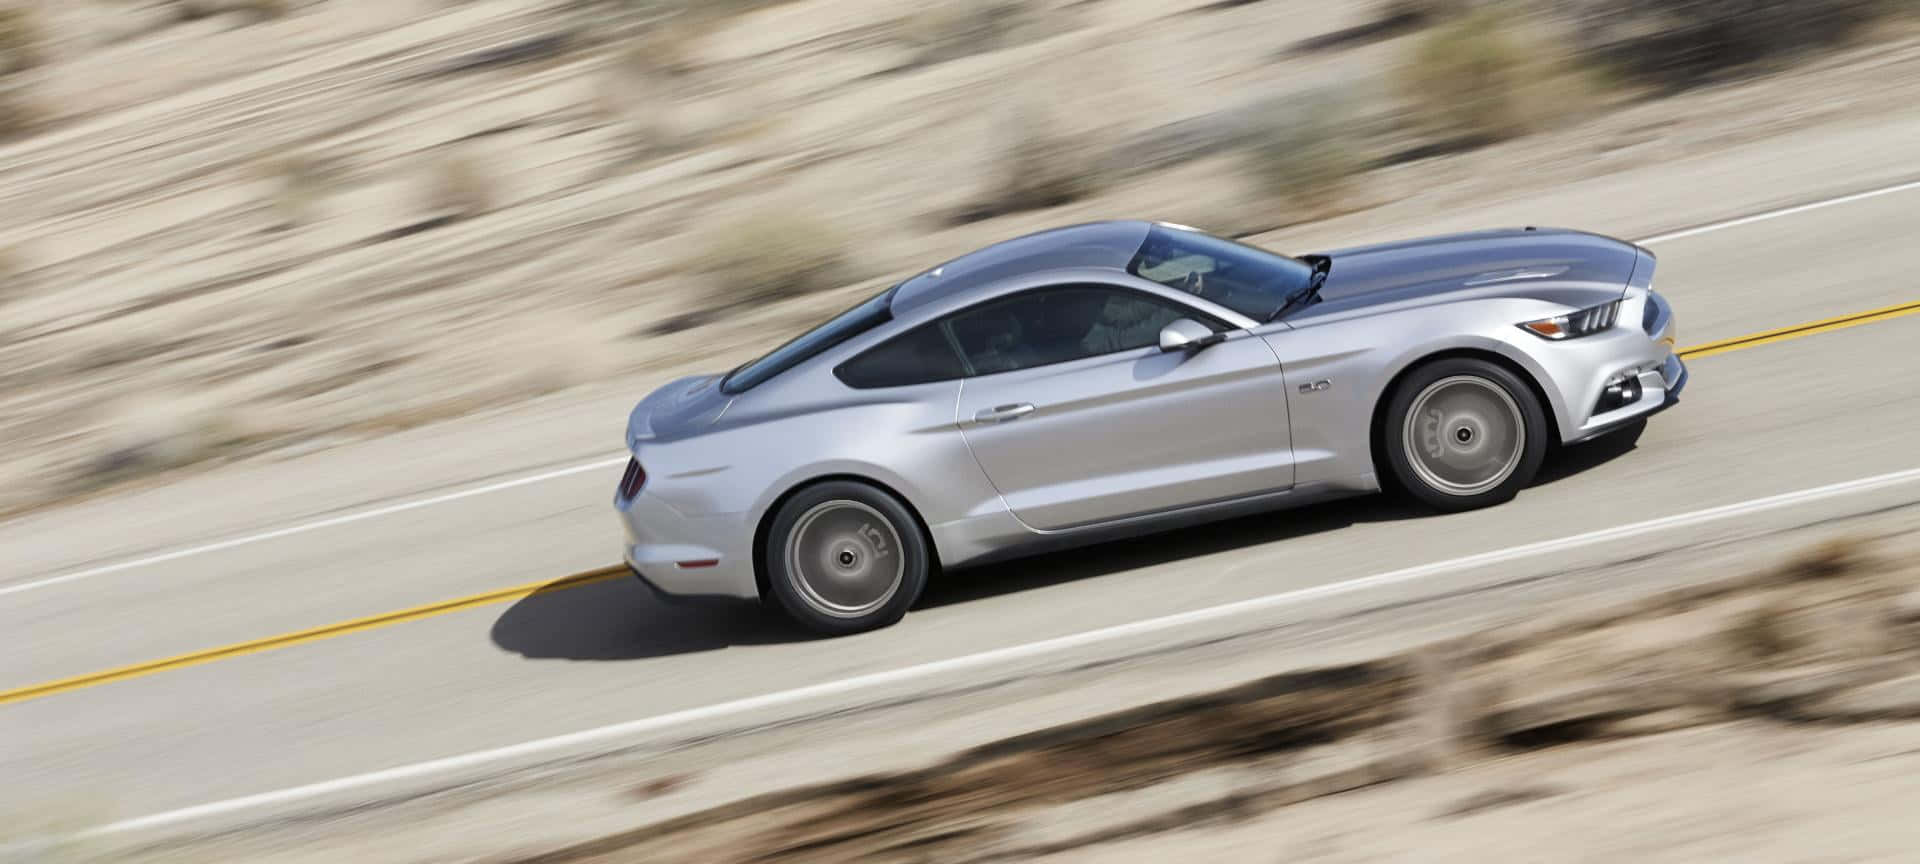 Ford Mustang California Special - The Ultimate Ride Wallpaper